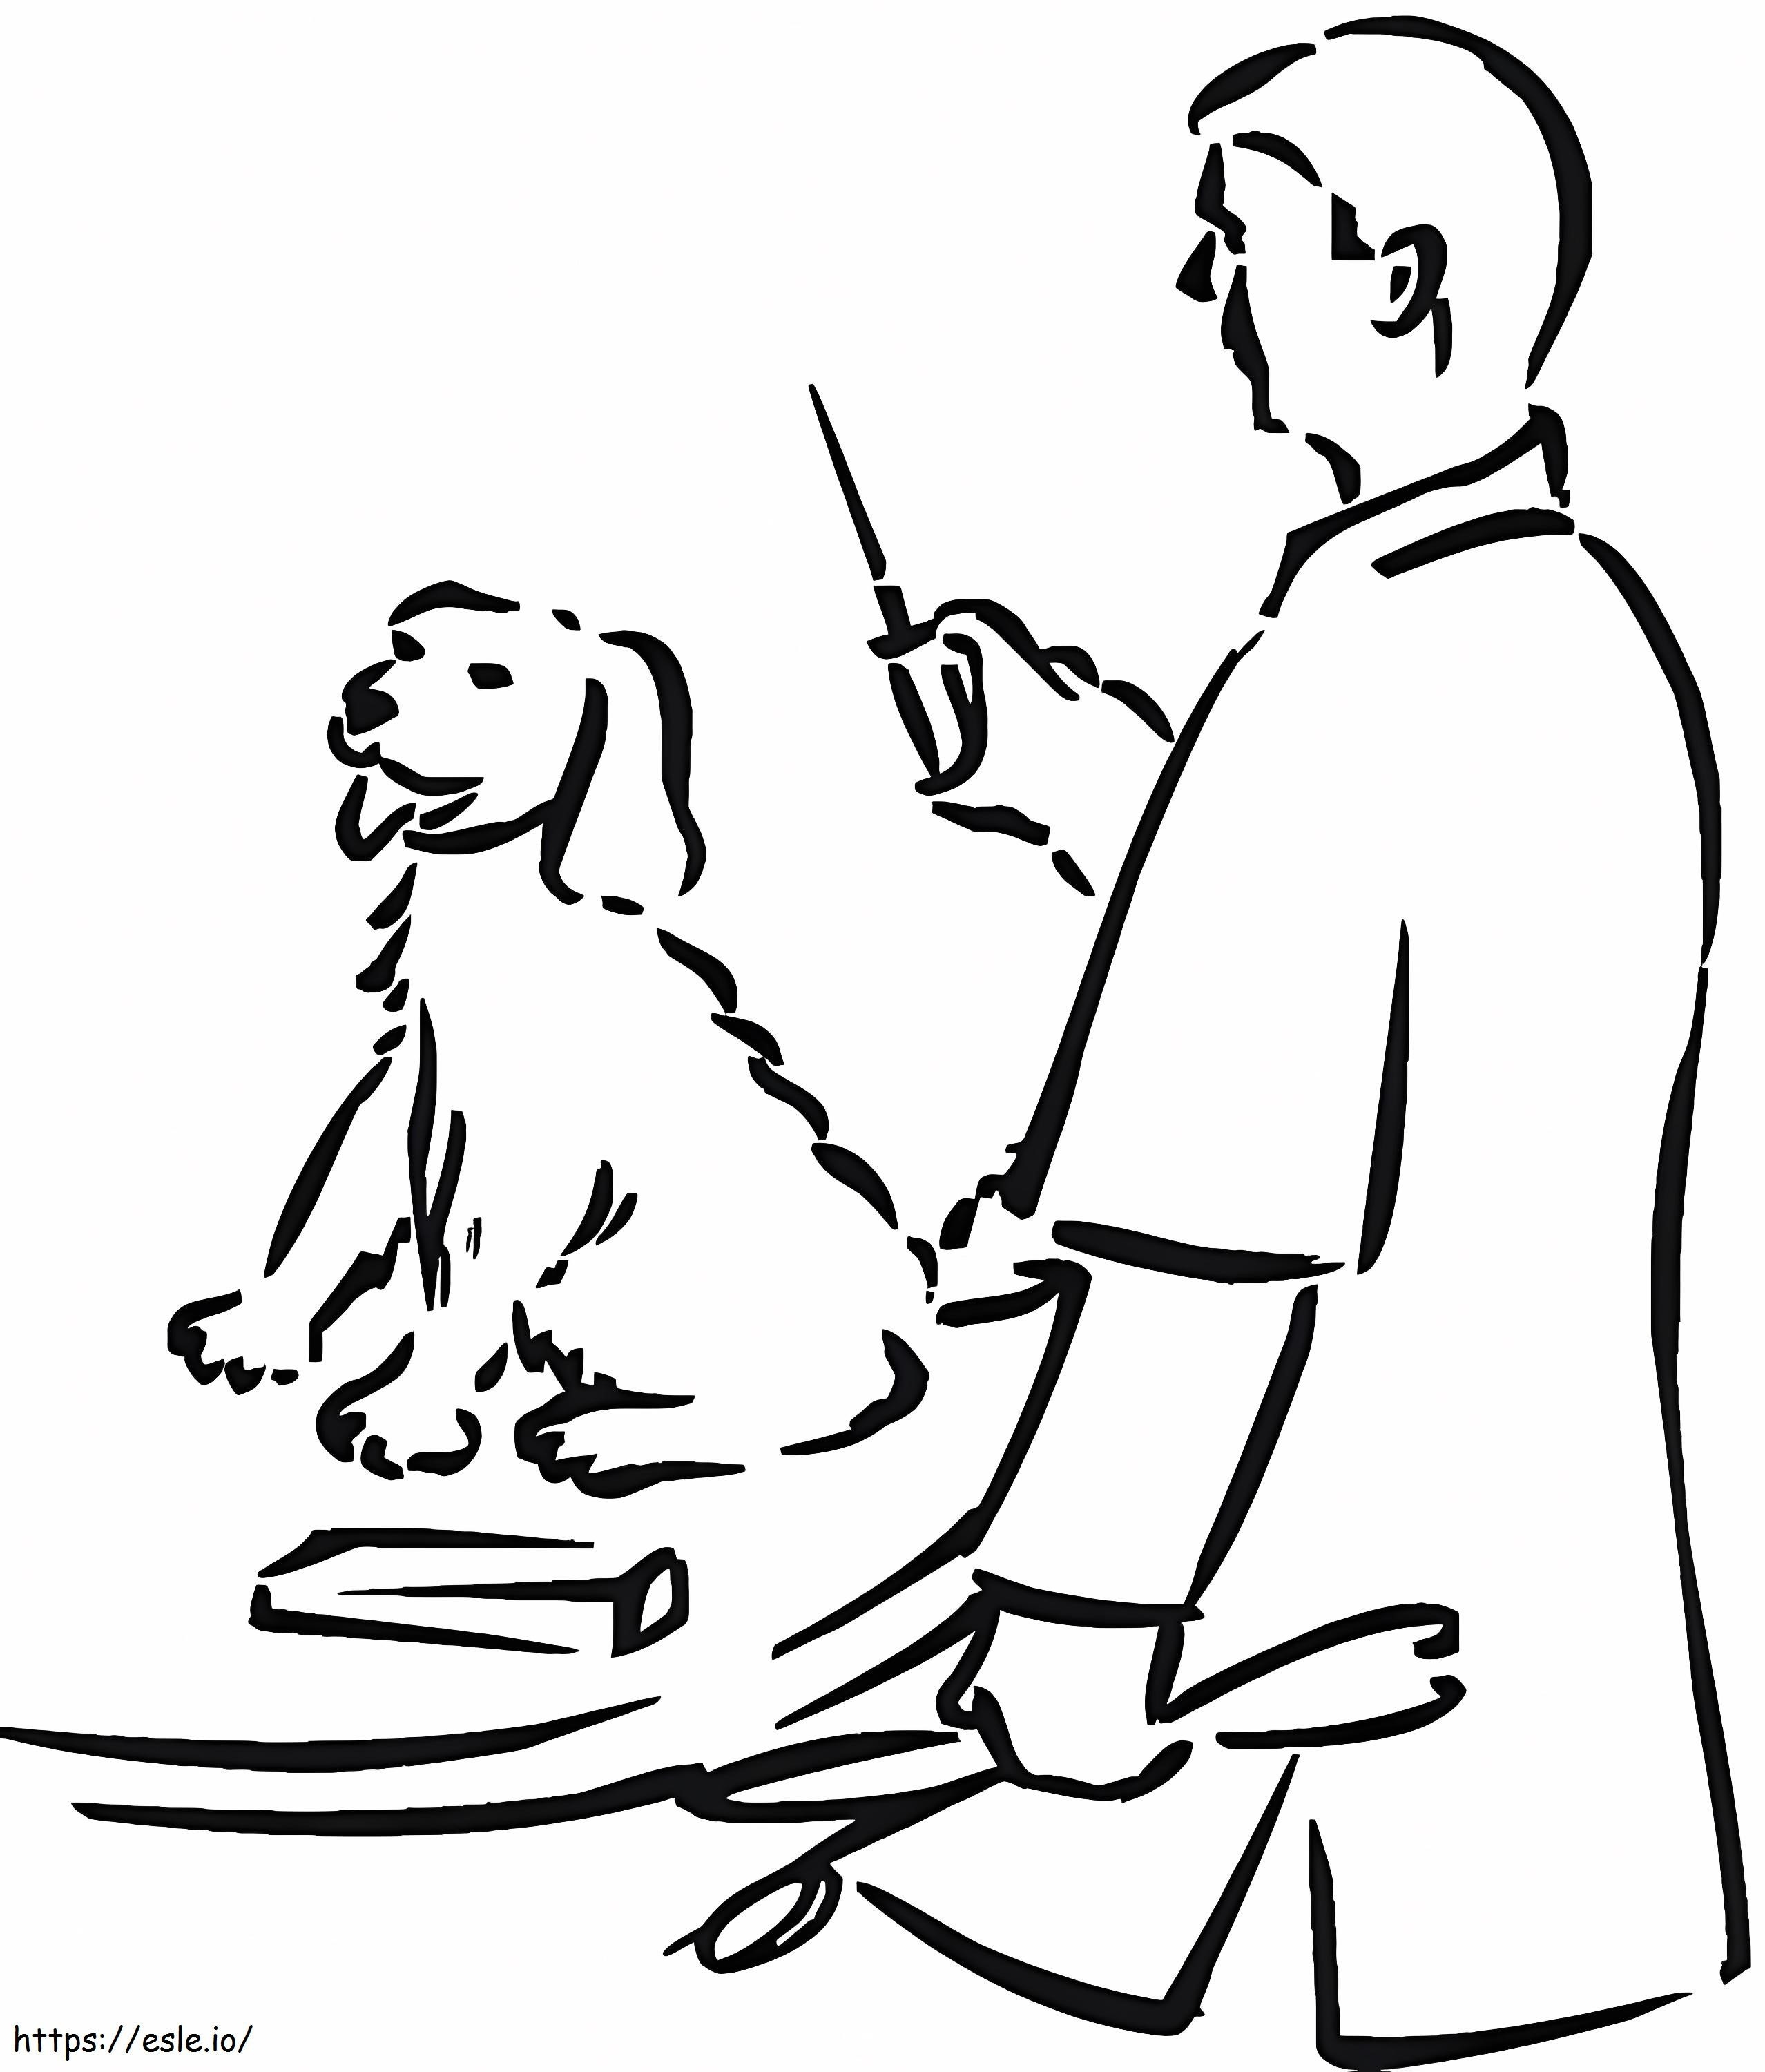 Veterinarian With A Dog coloring page